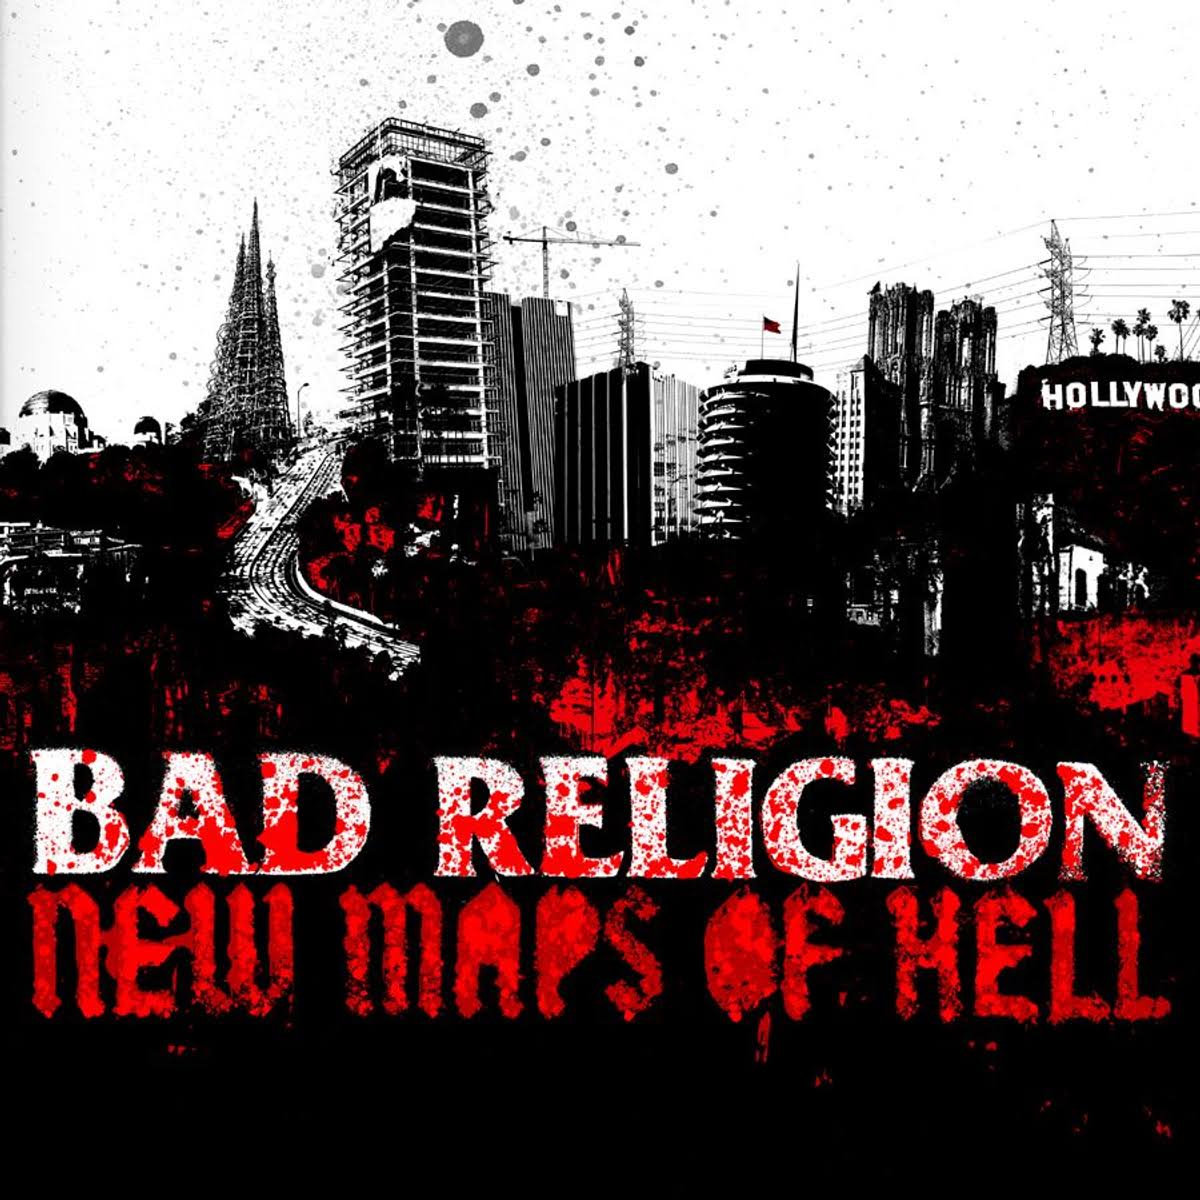 New Maps of Hell - Bad Religion